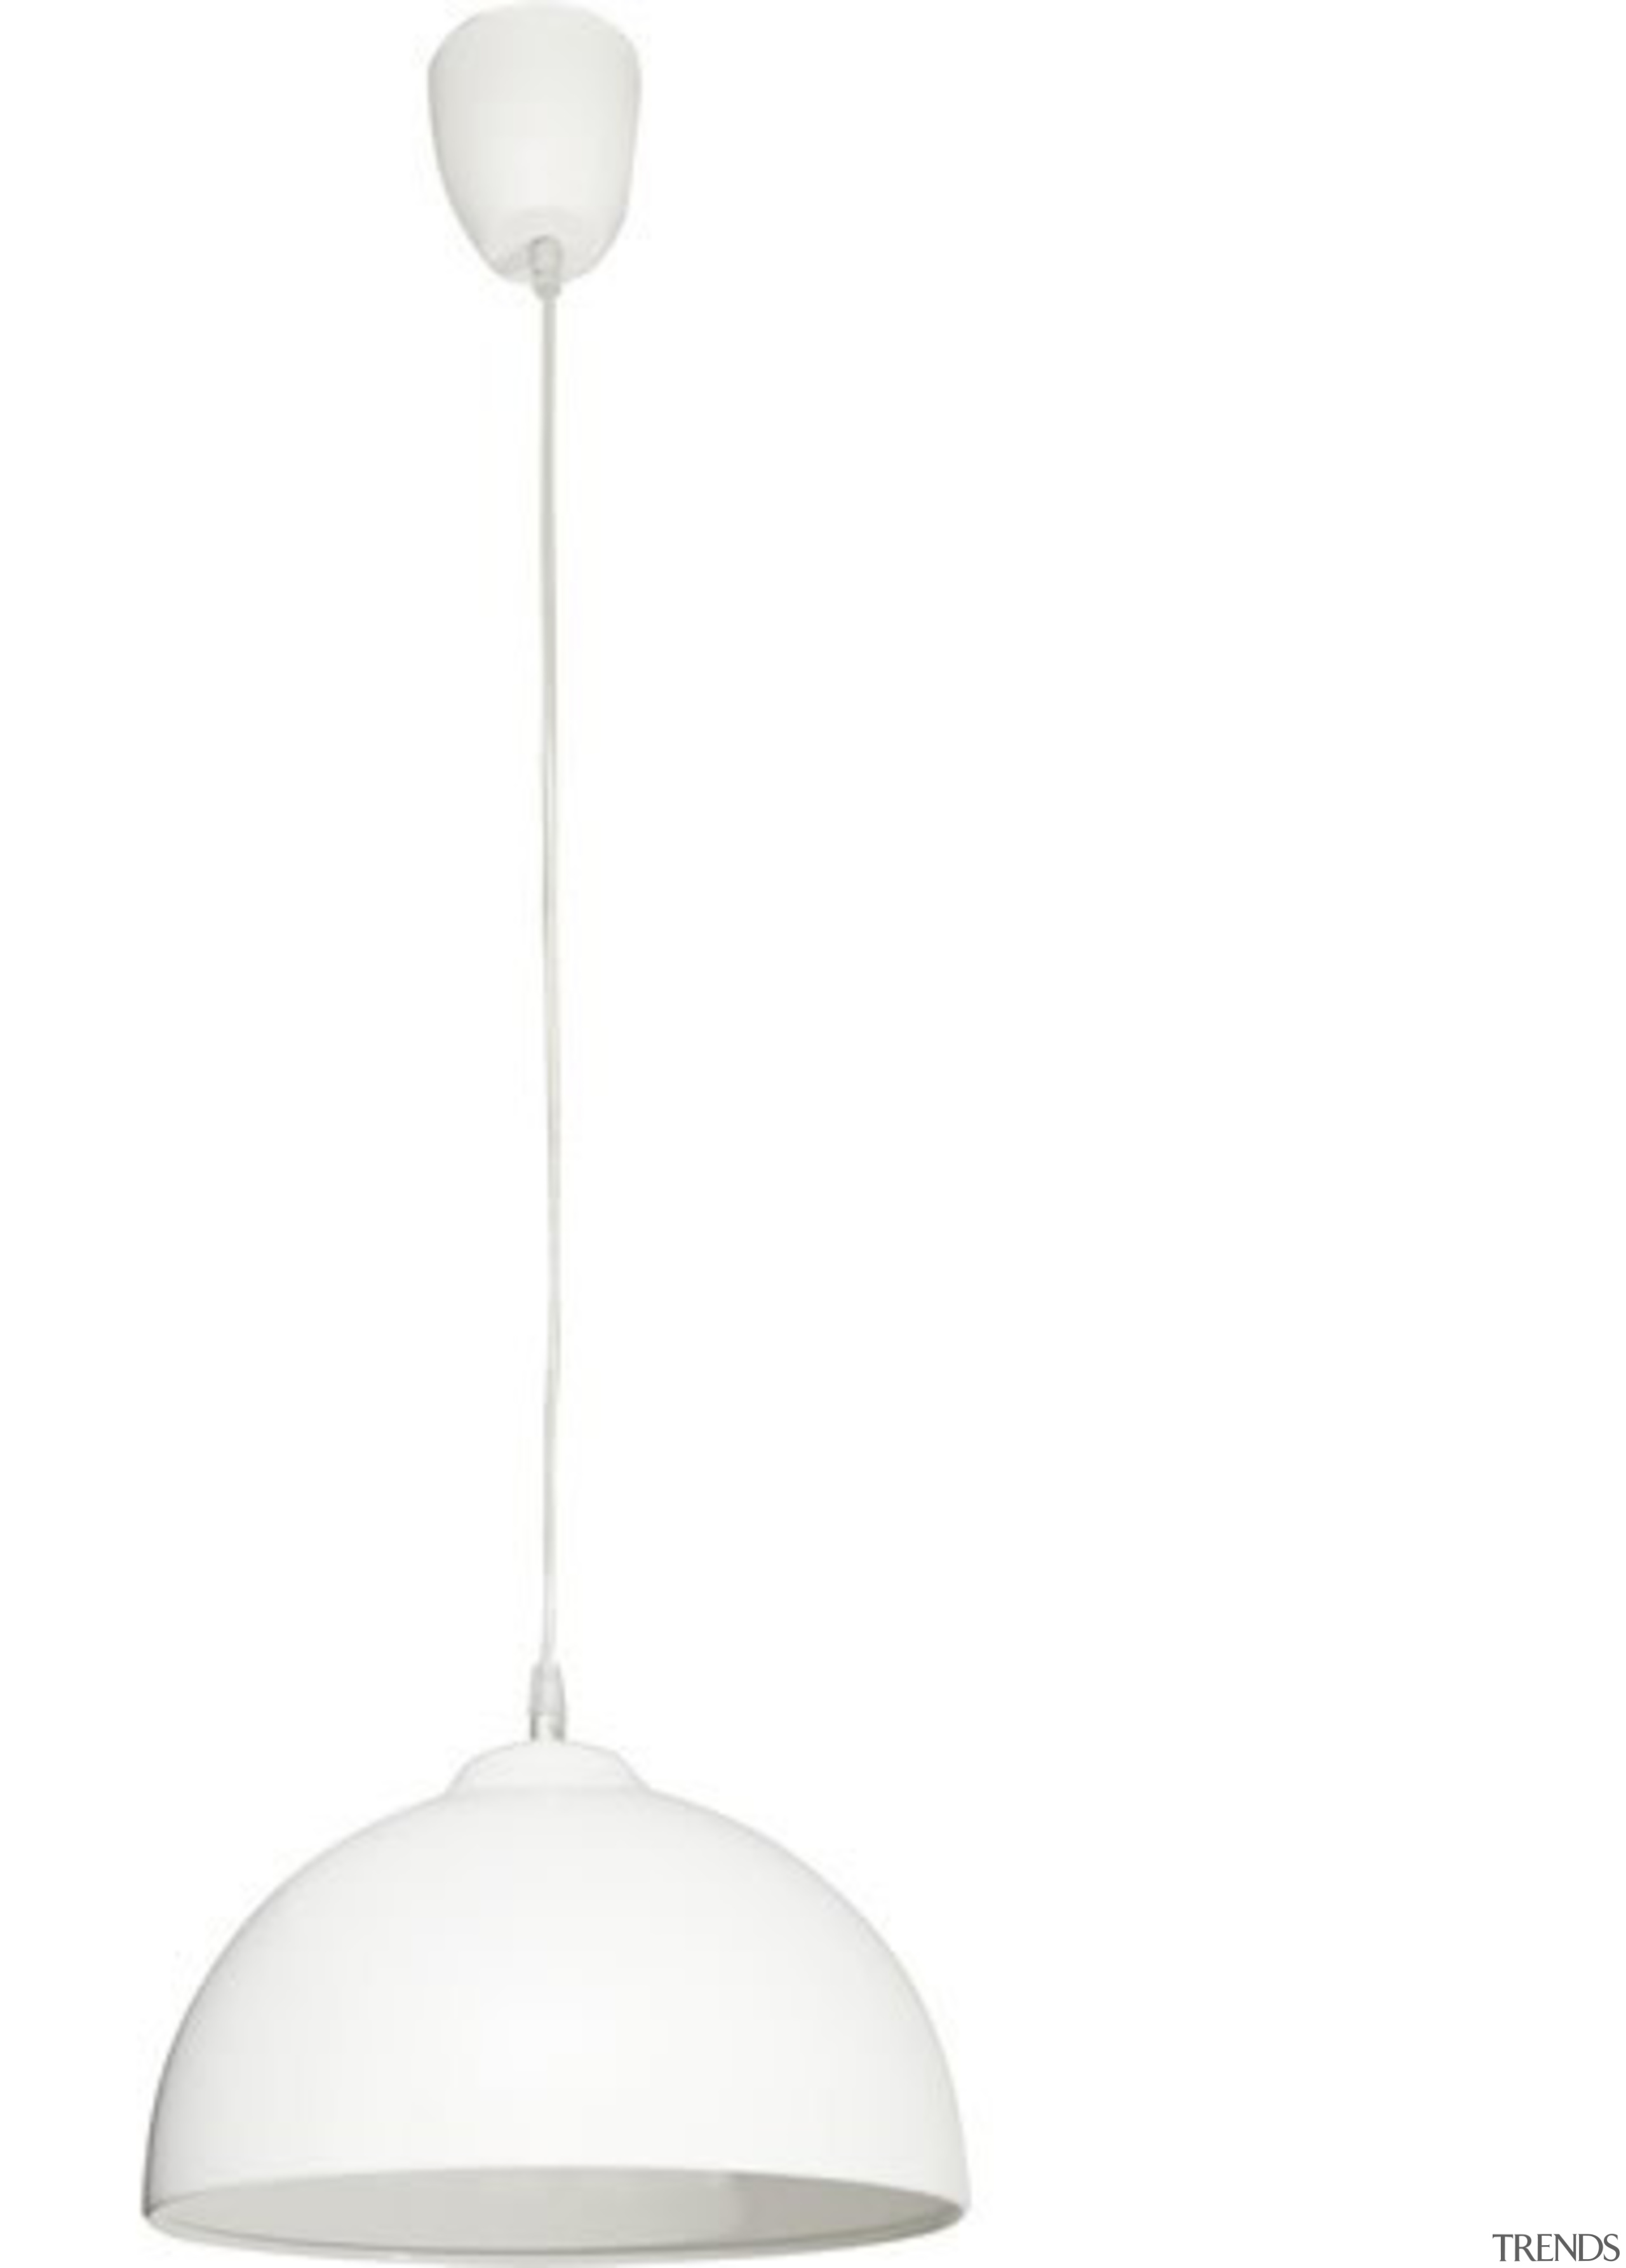 FeaturesThe Catena is a classical range of hemispherical ceiling fixture, light fixture, lighting, product design, white